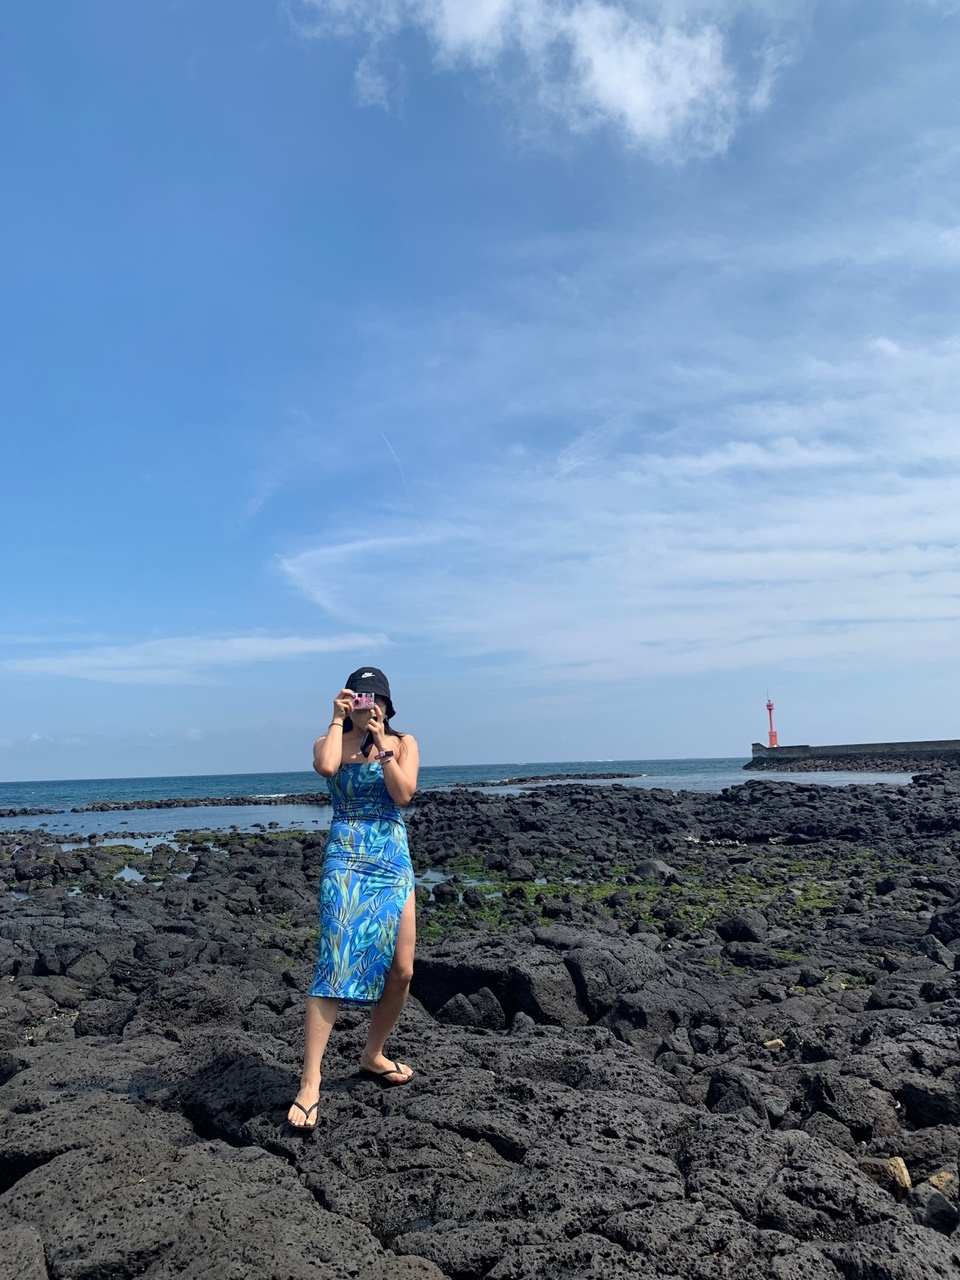 Kwon Jeong-hyun, an office worker in Seoul, on a solo trip to Jeju Island (Courtesy of Kwon Jeong-hyun)